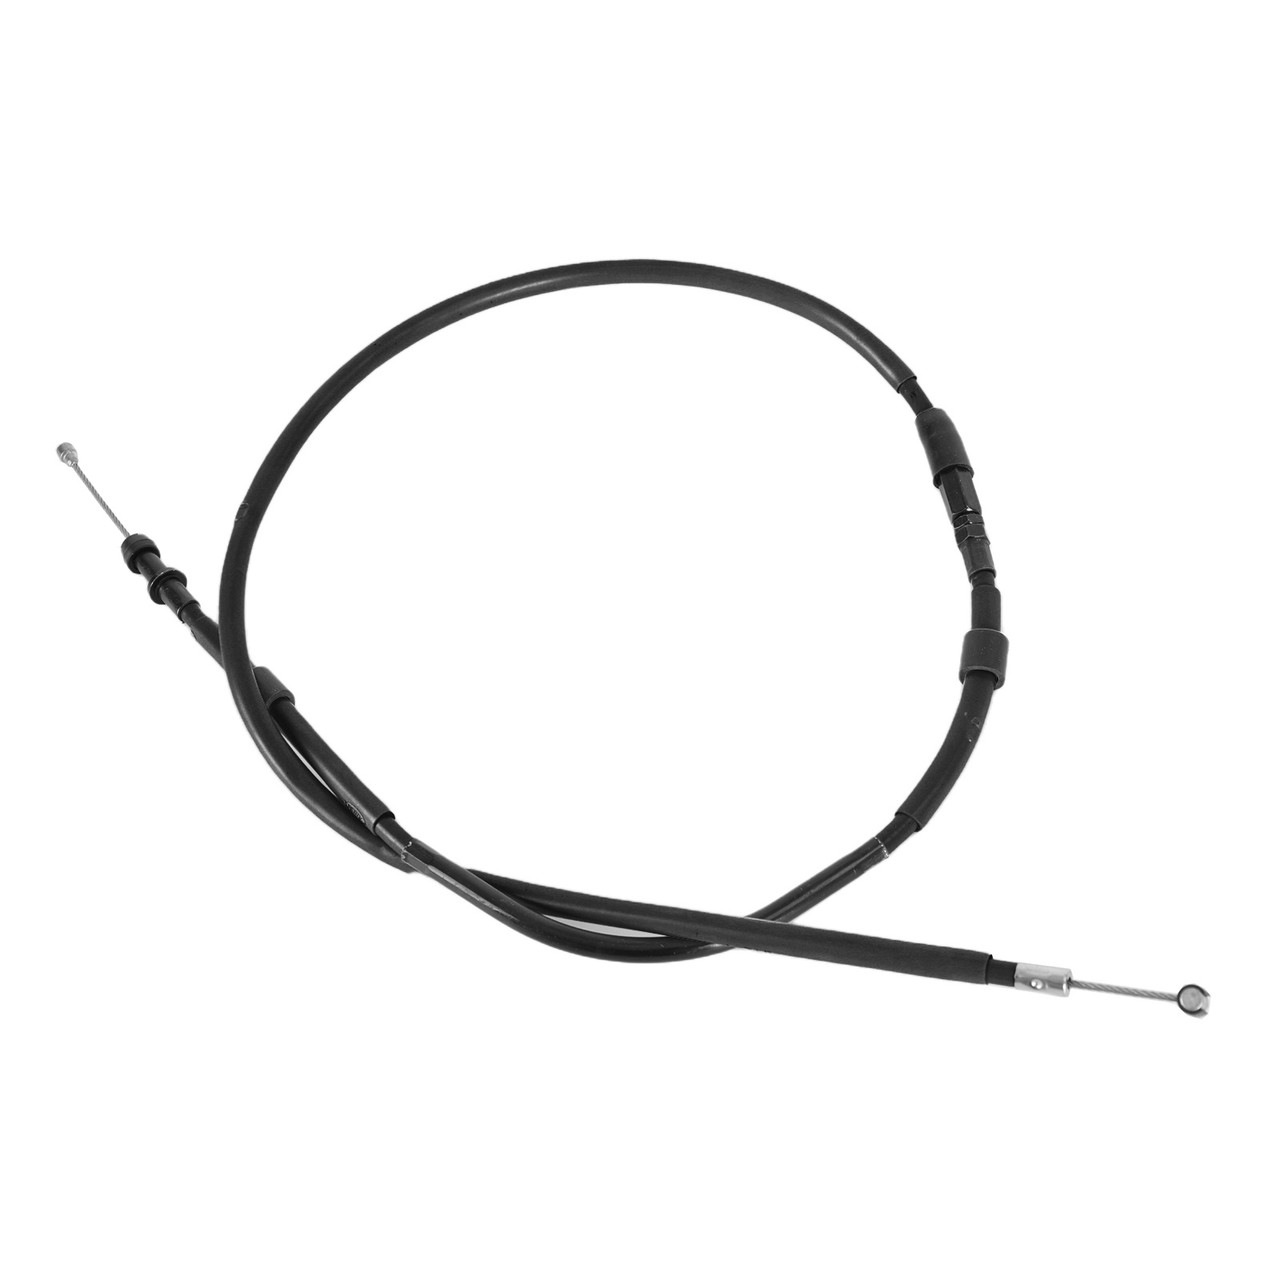 Clutch Cable Wire Fit for Yamaha FZ6N 2004-2010 Black